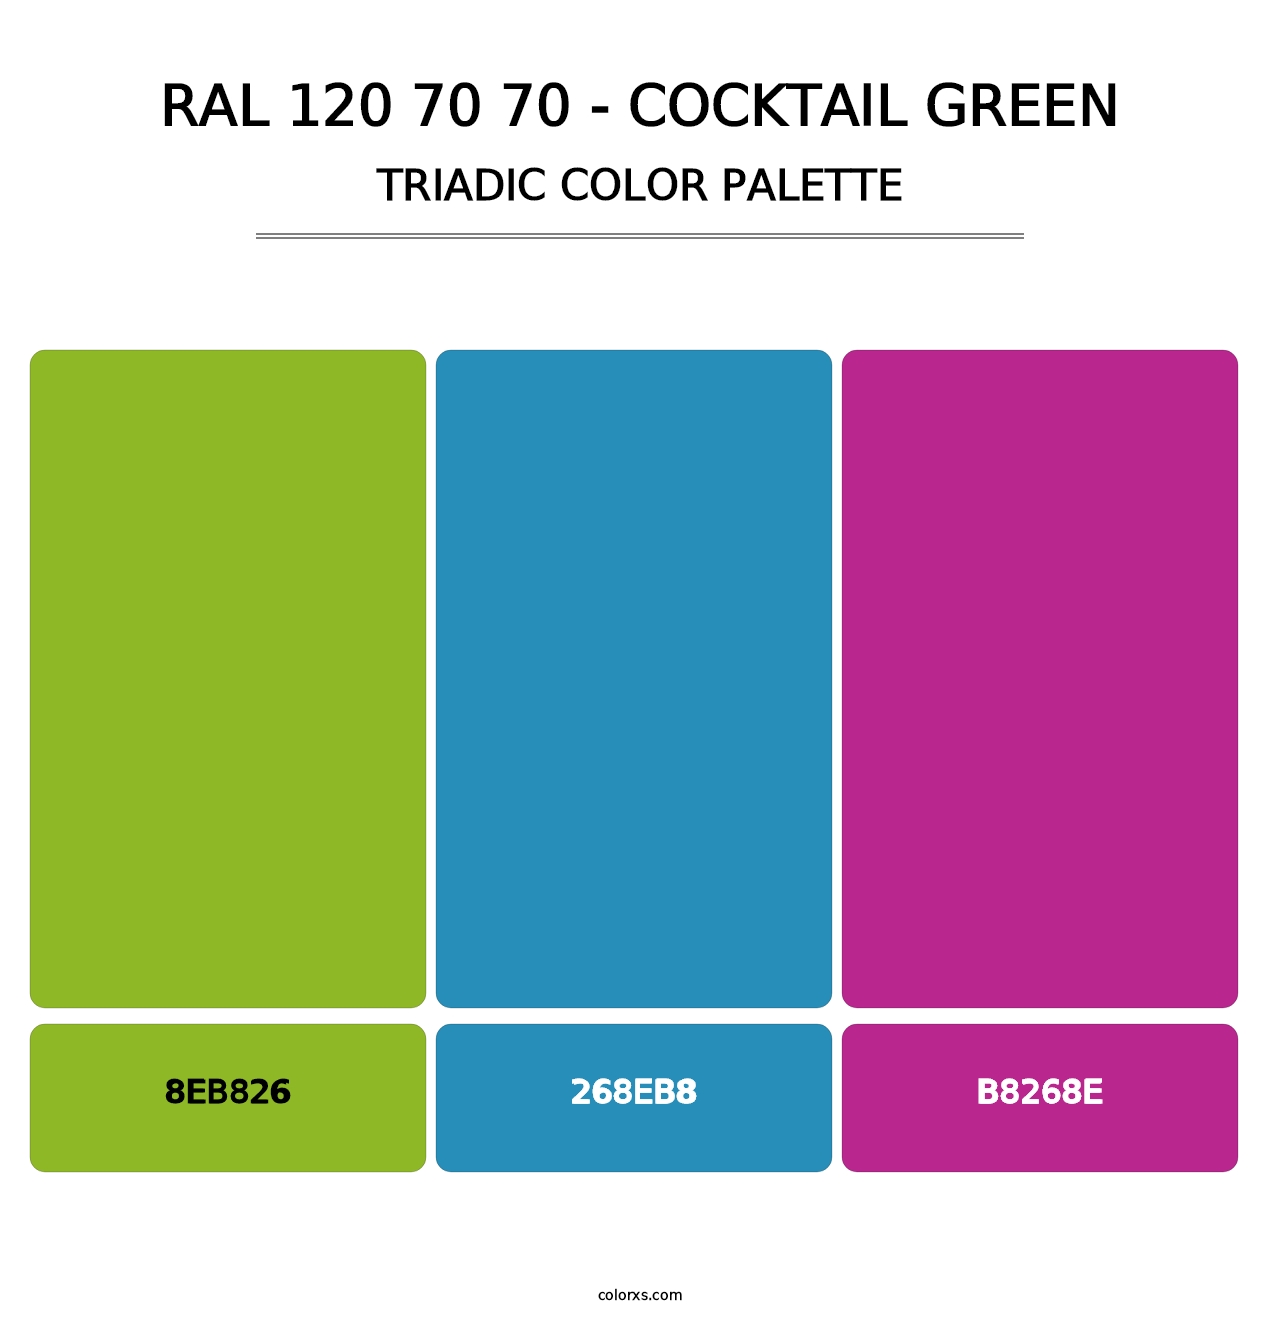 RAL 120 70 70 - Cocktail Green - Triadic Color Palette